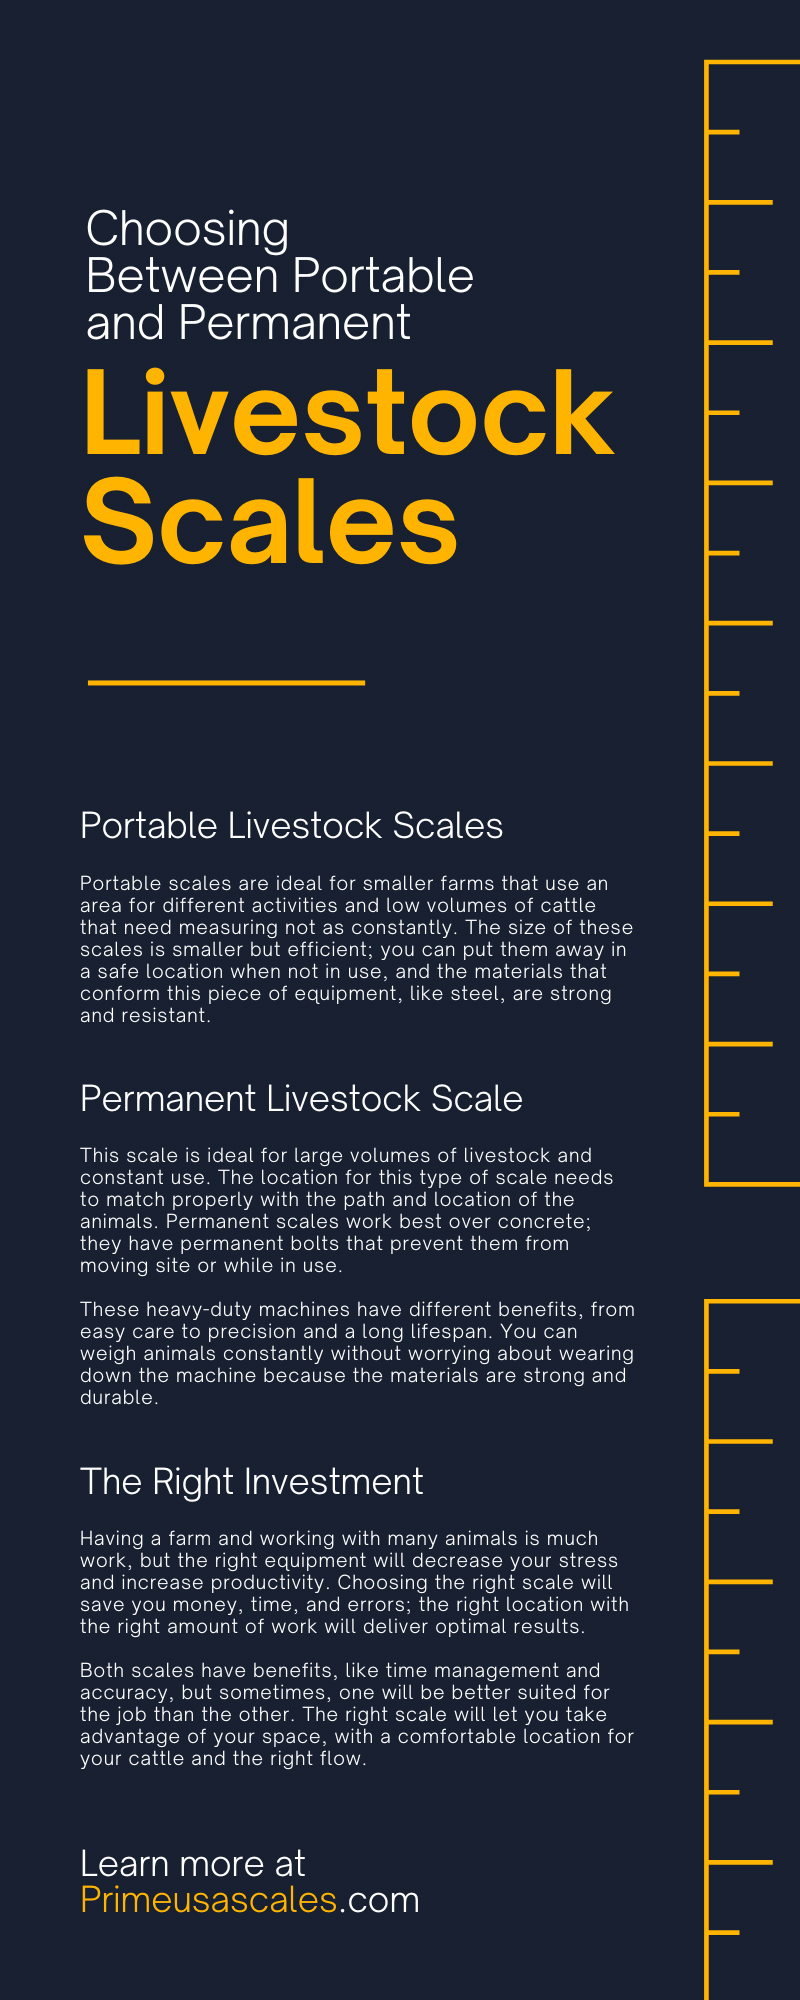 Choosing Between Portable and Permanent Livestock Scales